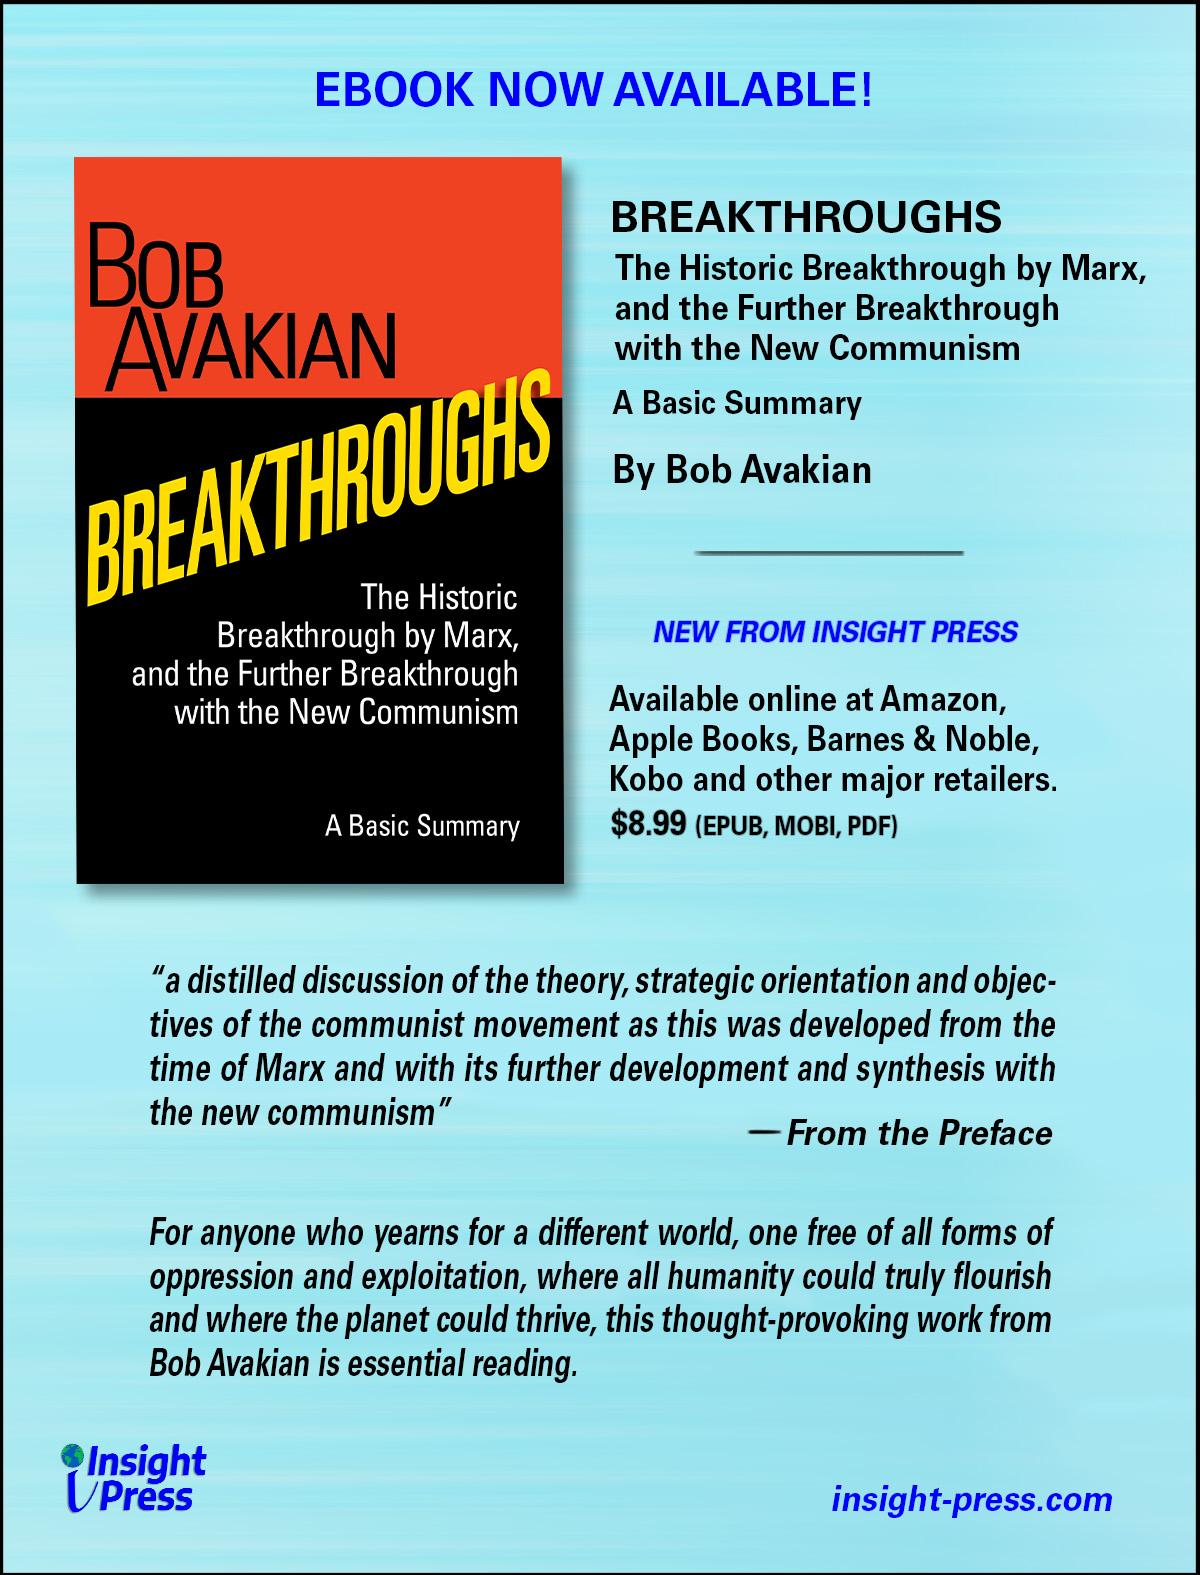 Cover of ebook Breakthroughs by Bob Avakian with text about it.